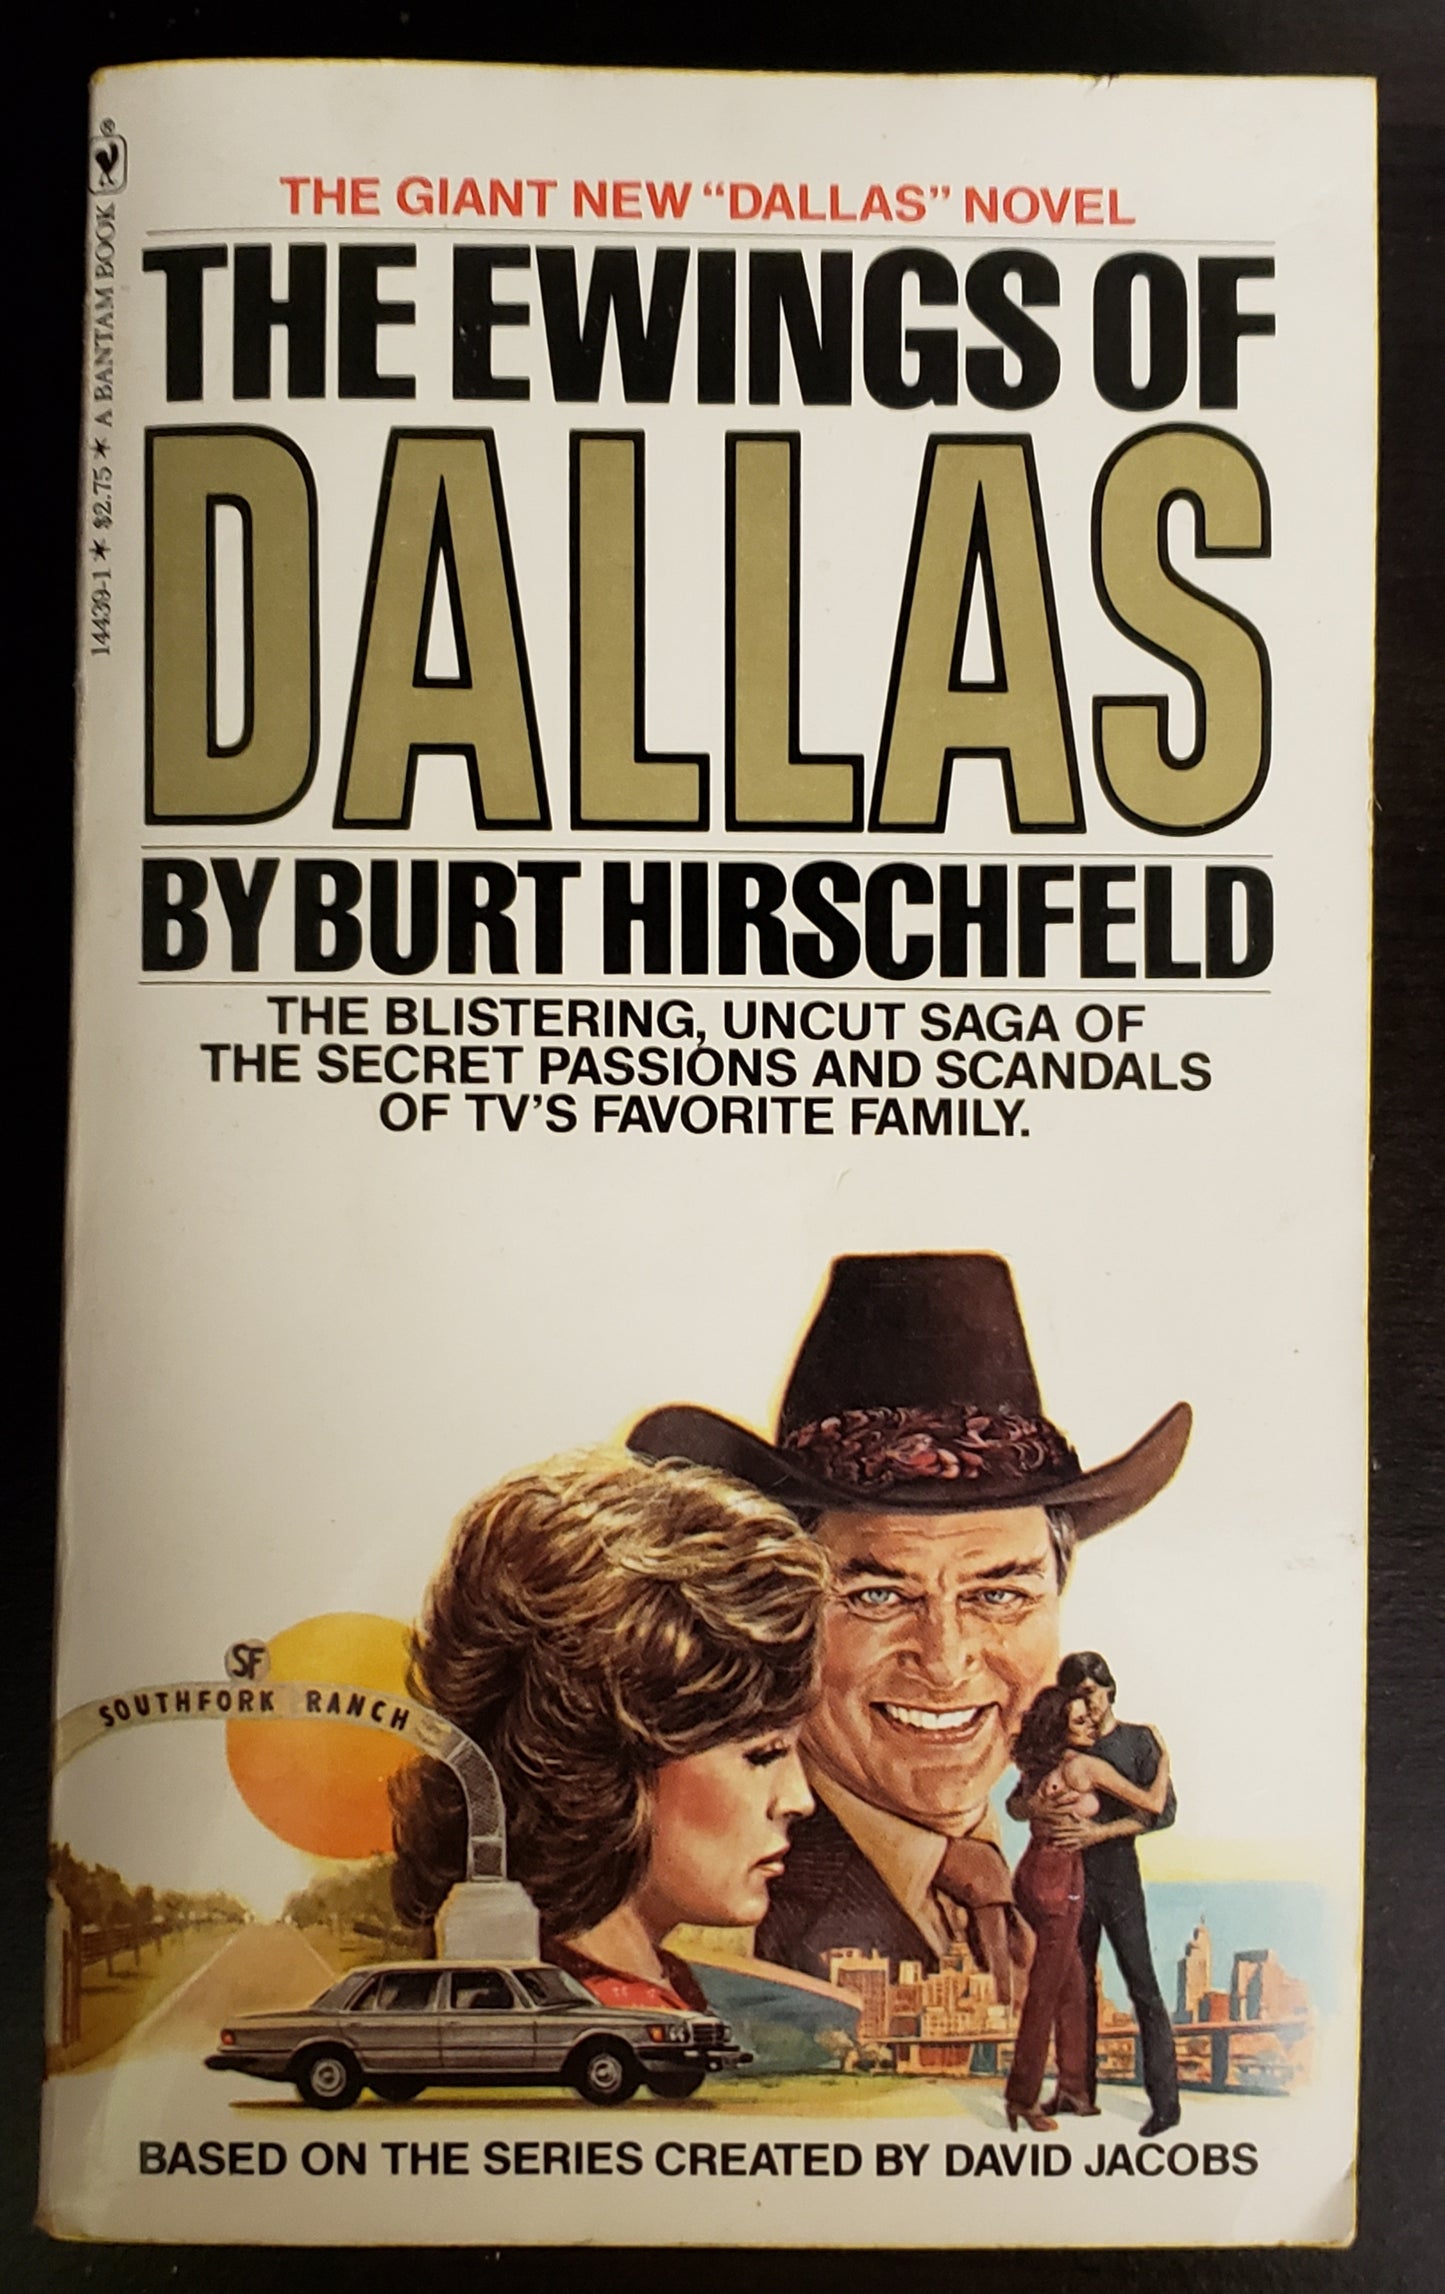 The Ewings of Dallas paperback